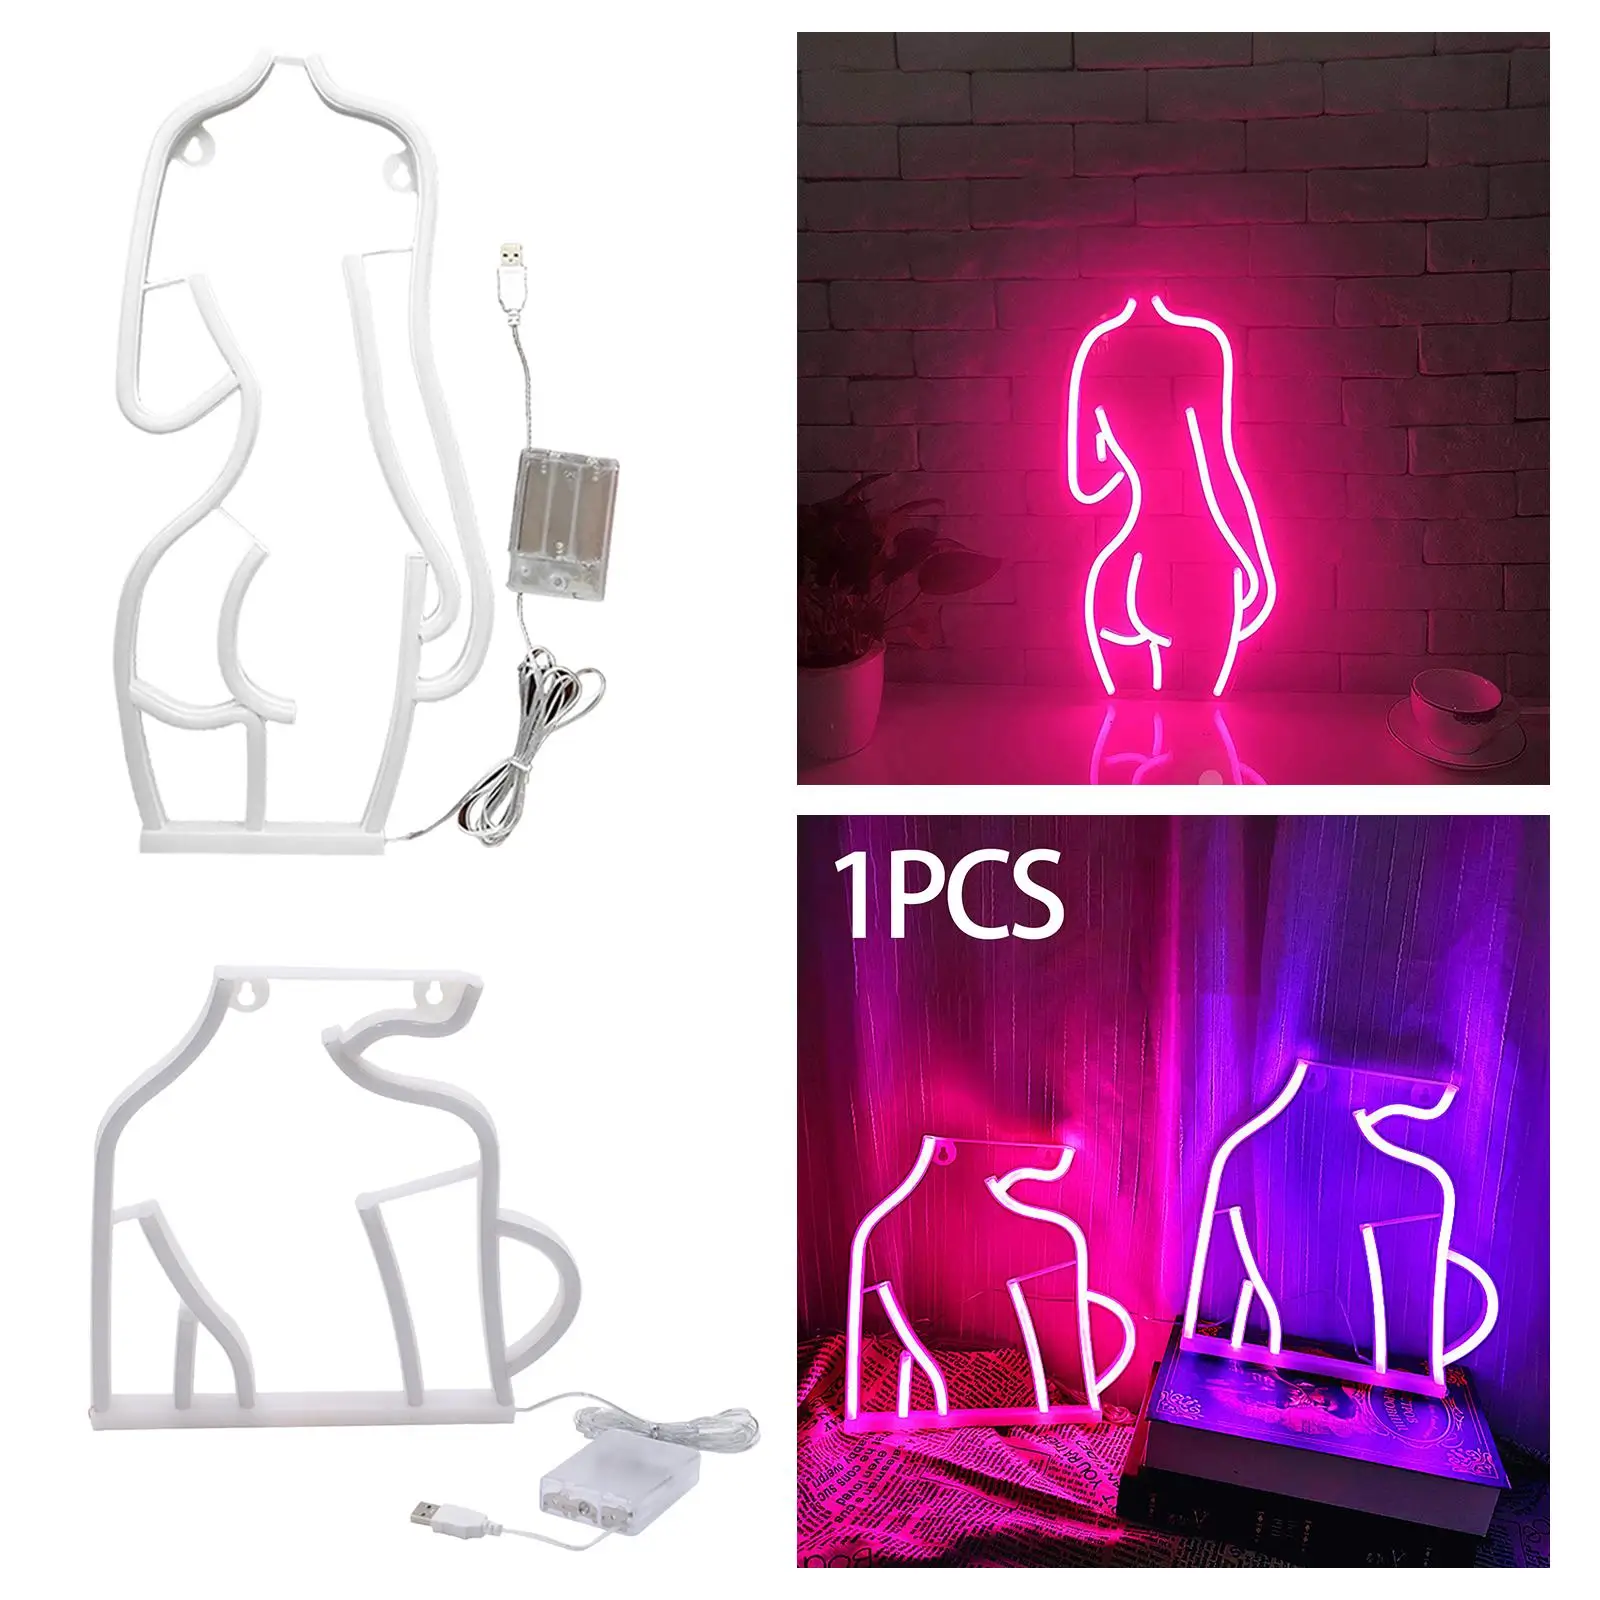 Lady Back Girls Woman Body Neon Sign Hanging Lamp Wall Decor LED Night Lights Decorative Light for Store Bedroom Hotel Wall